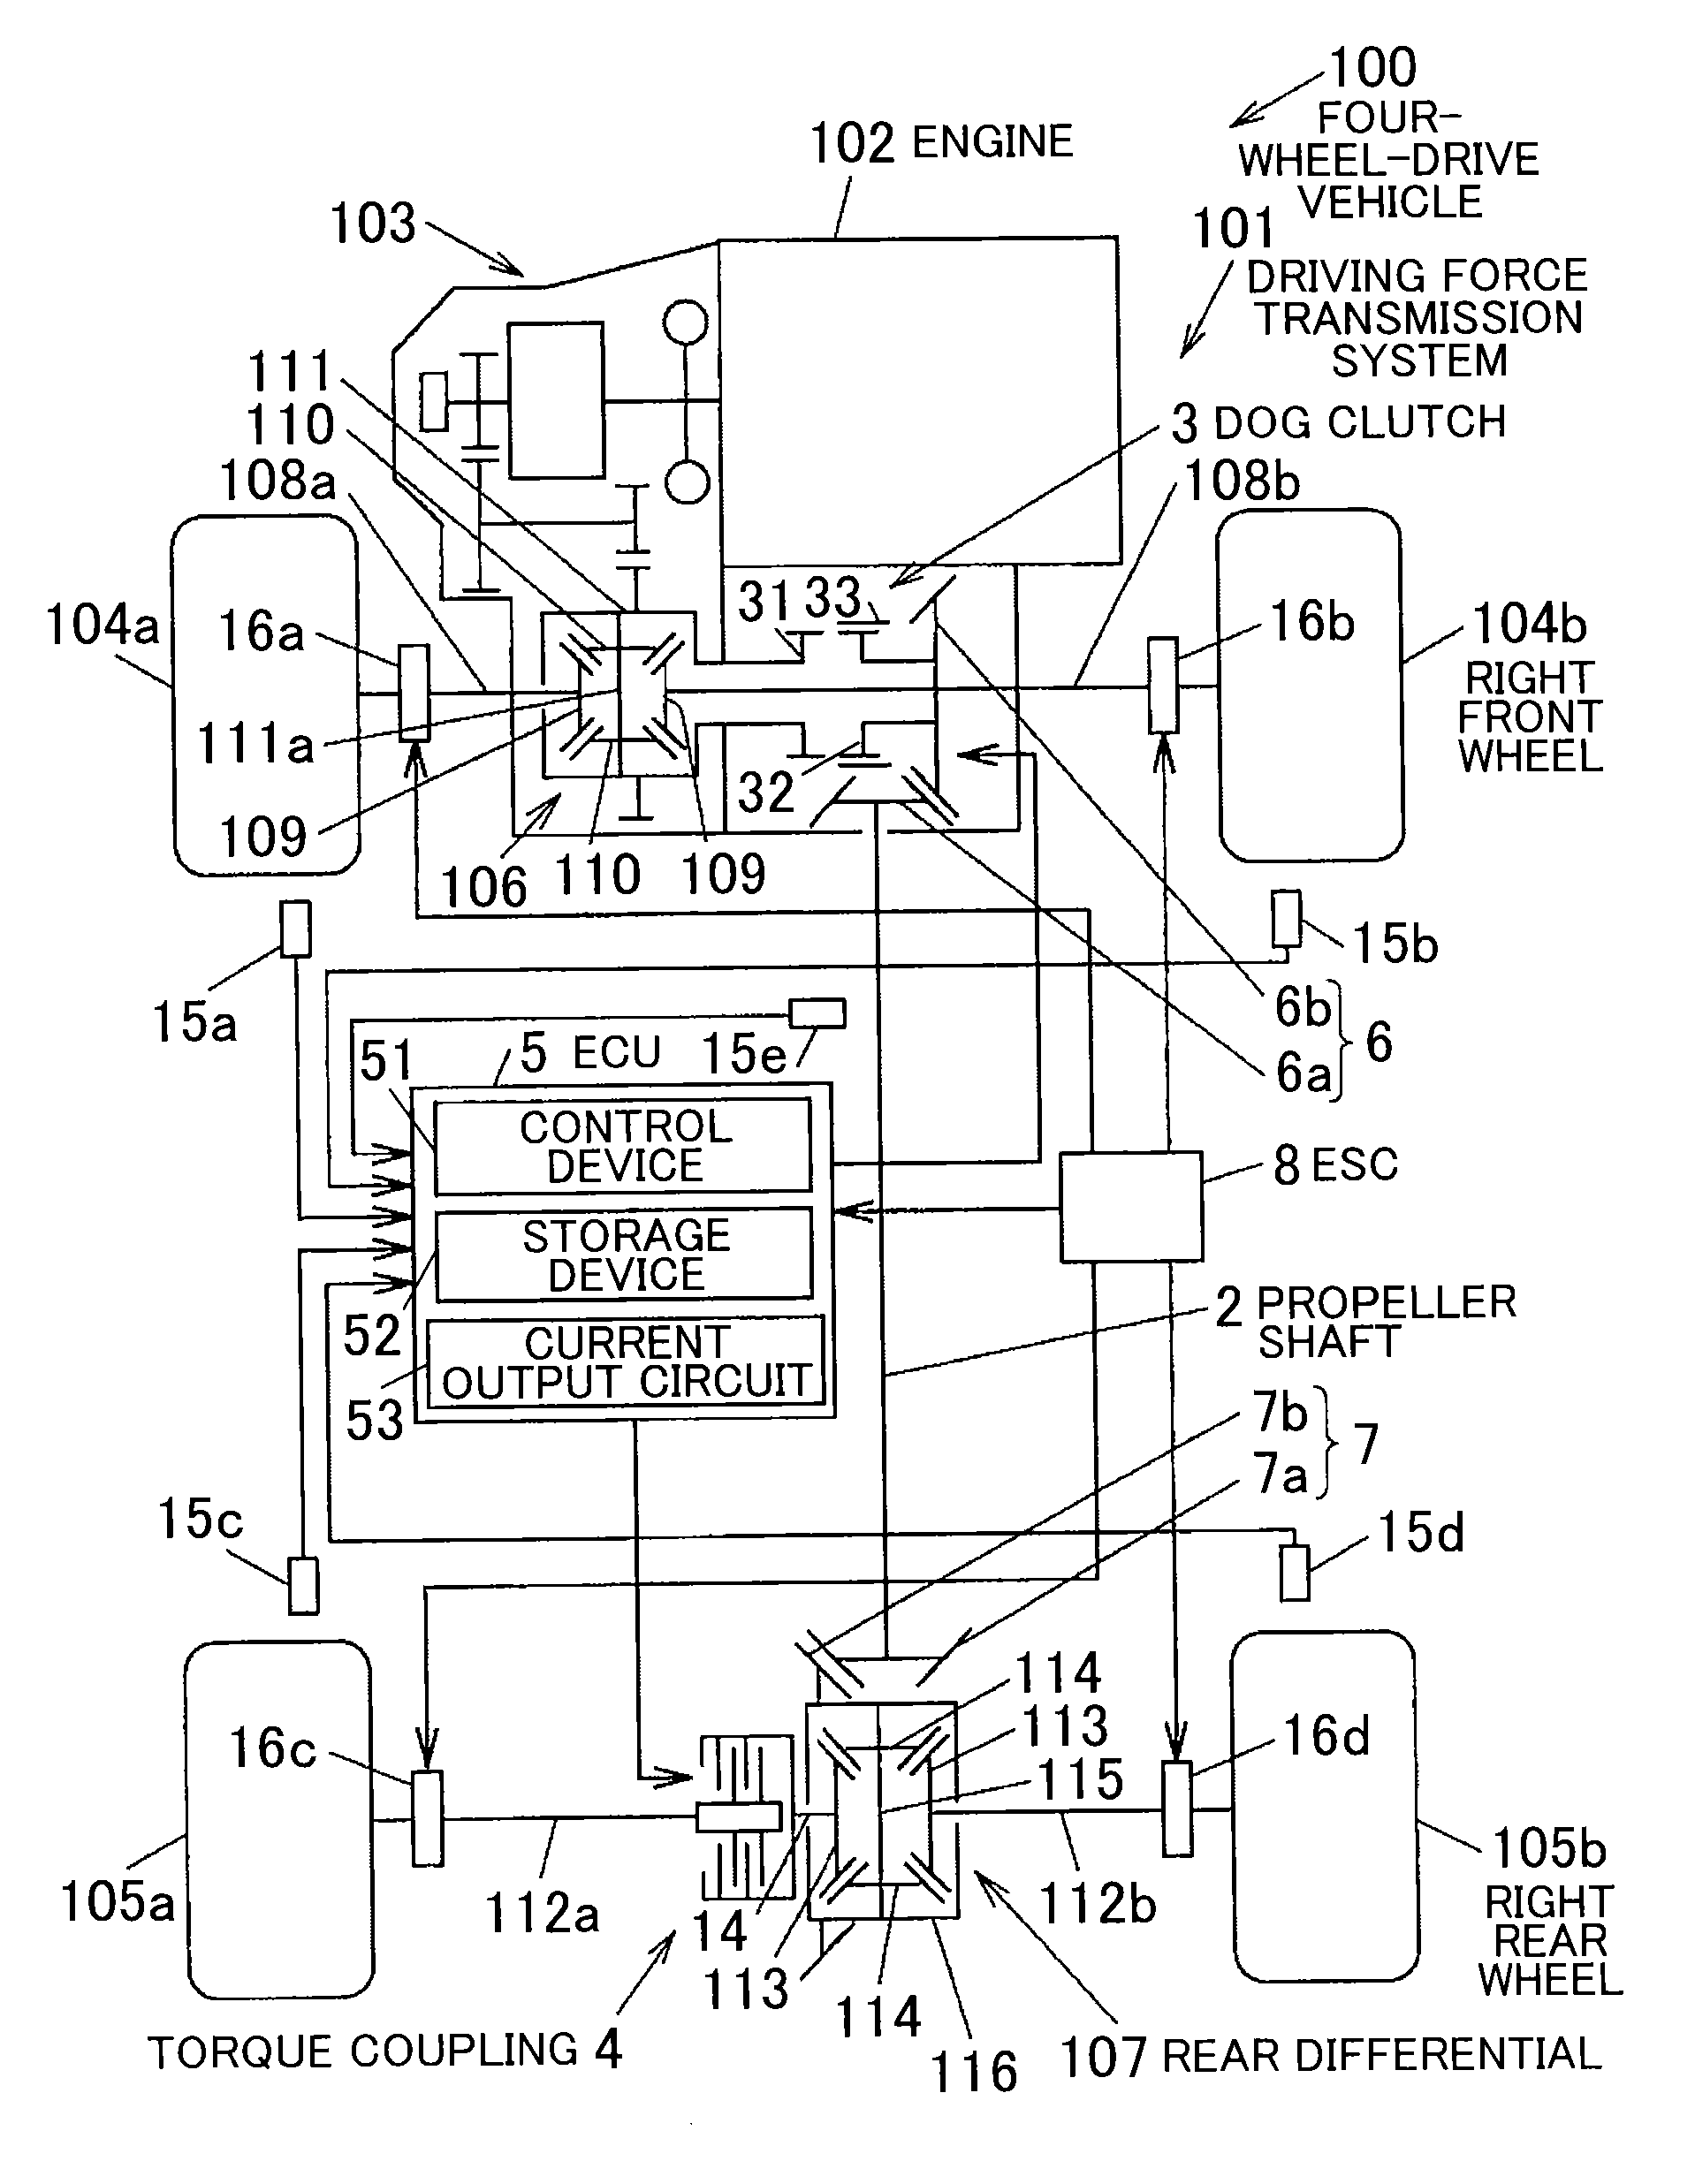 Device and method for controlling limited slip differential